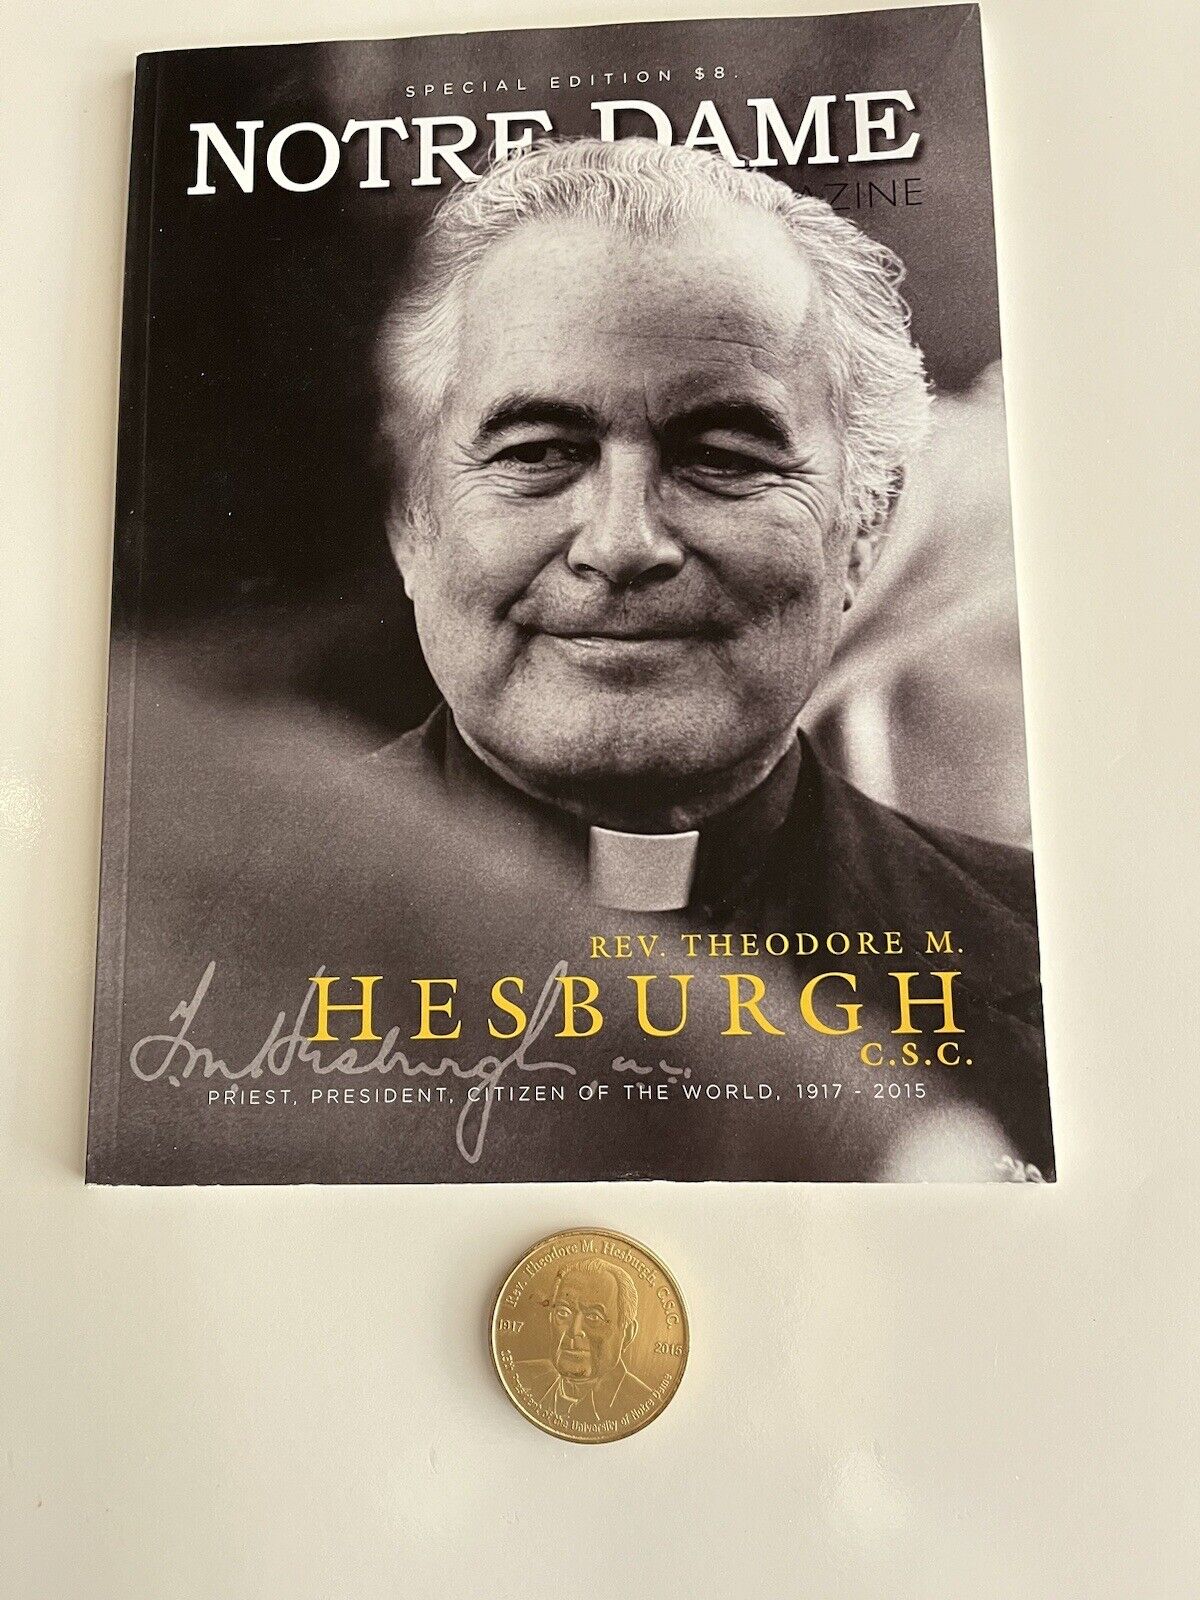 Father Hesburgh Commemorative Coin And Notre Dame Magazine: Special Edition